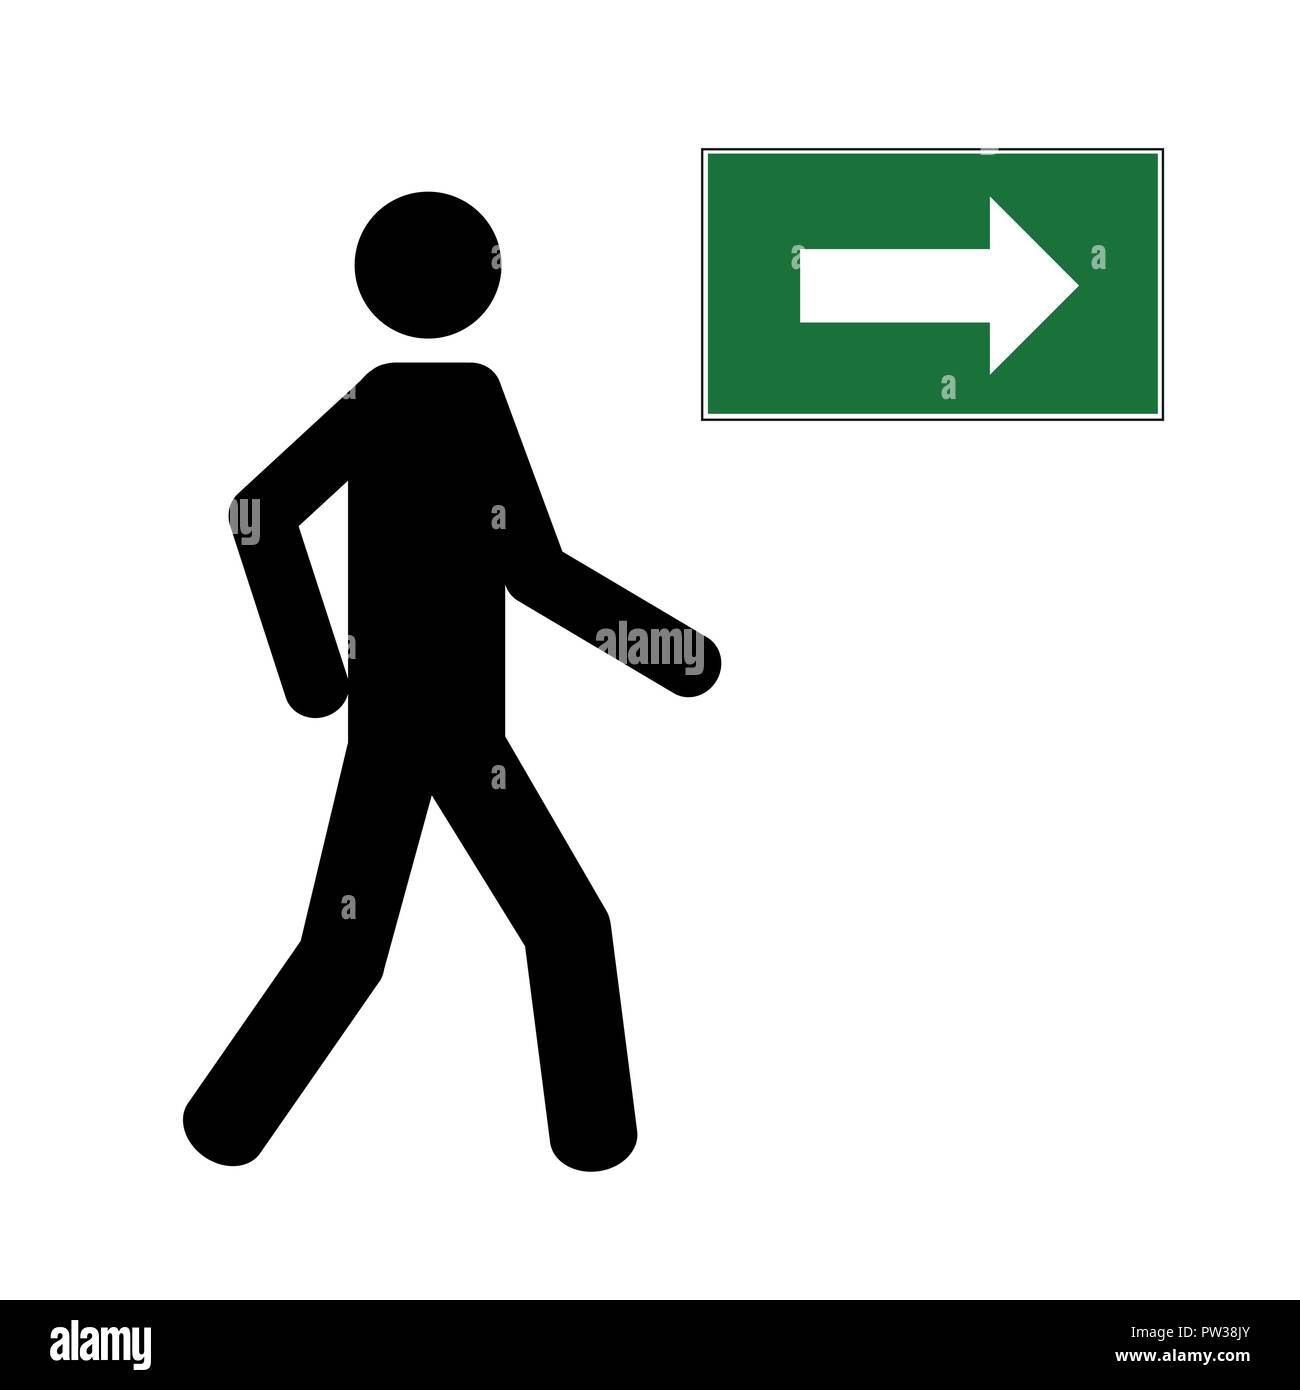 man walking by foot icon pedestrian pictogram with green arrow vector illustration Stock Vector